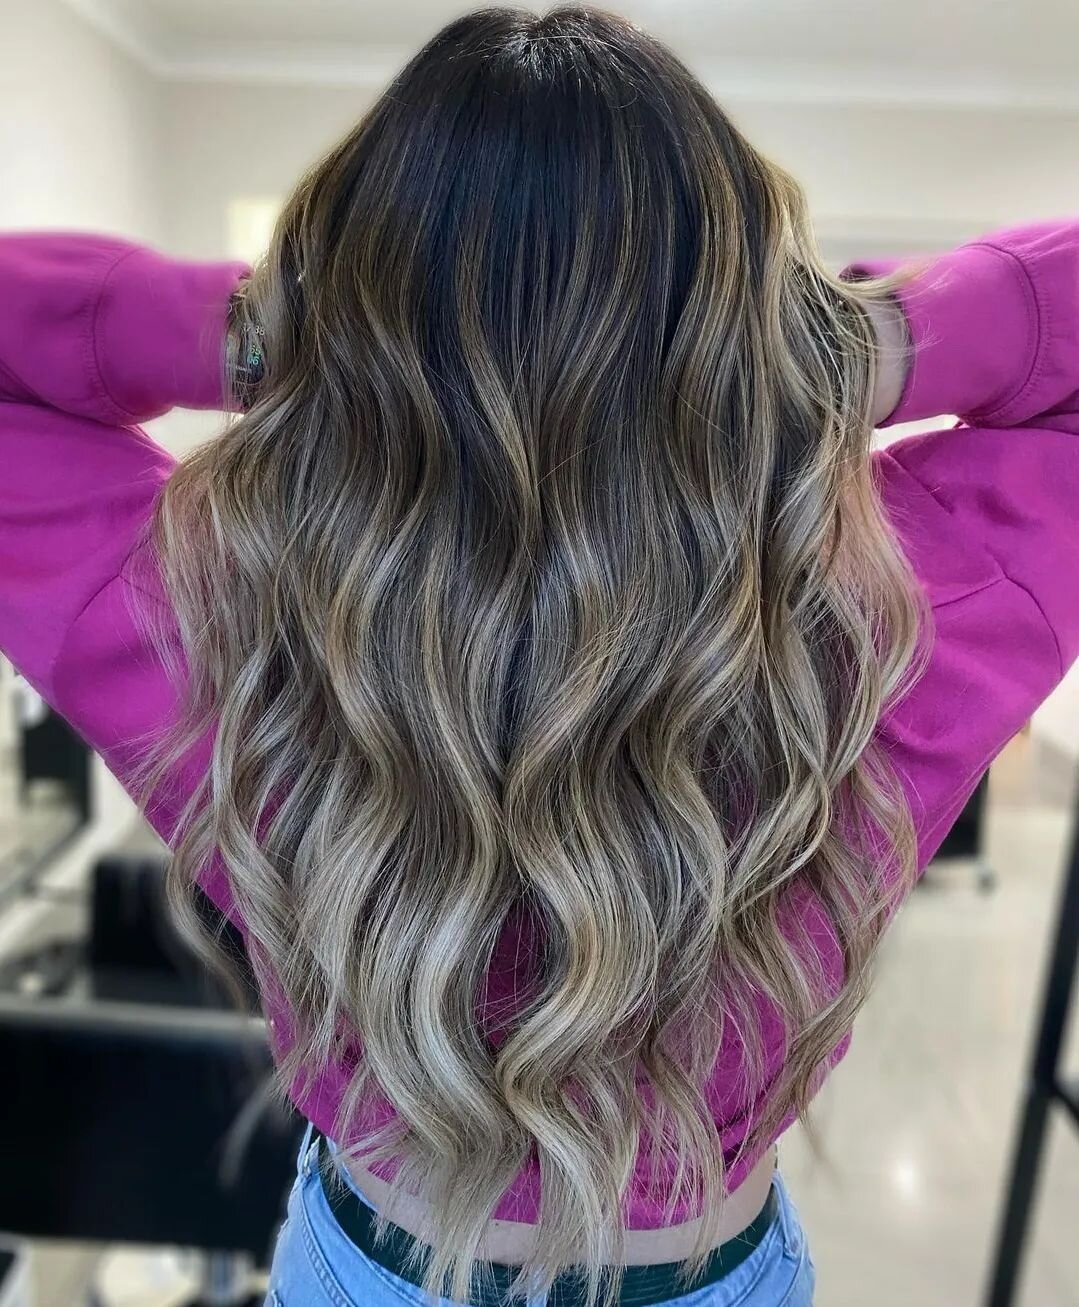 #Repost @carlydoneit with @let.repost 
&bull; &bull; &bull; &bull; &bull; &bull;
A little lowlight to create dimension and a clean up of the blonde to create brighter ribbons should do the job 💁🏻&zwj;♀️✨